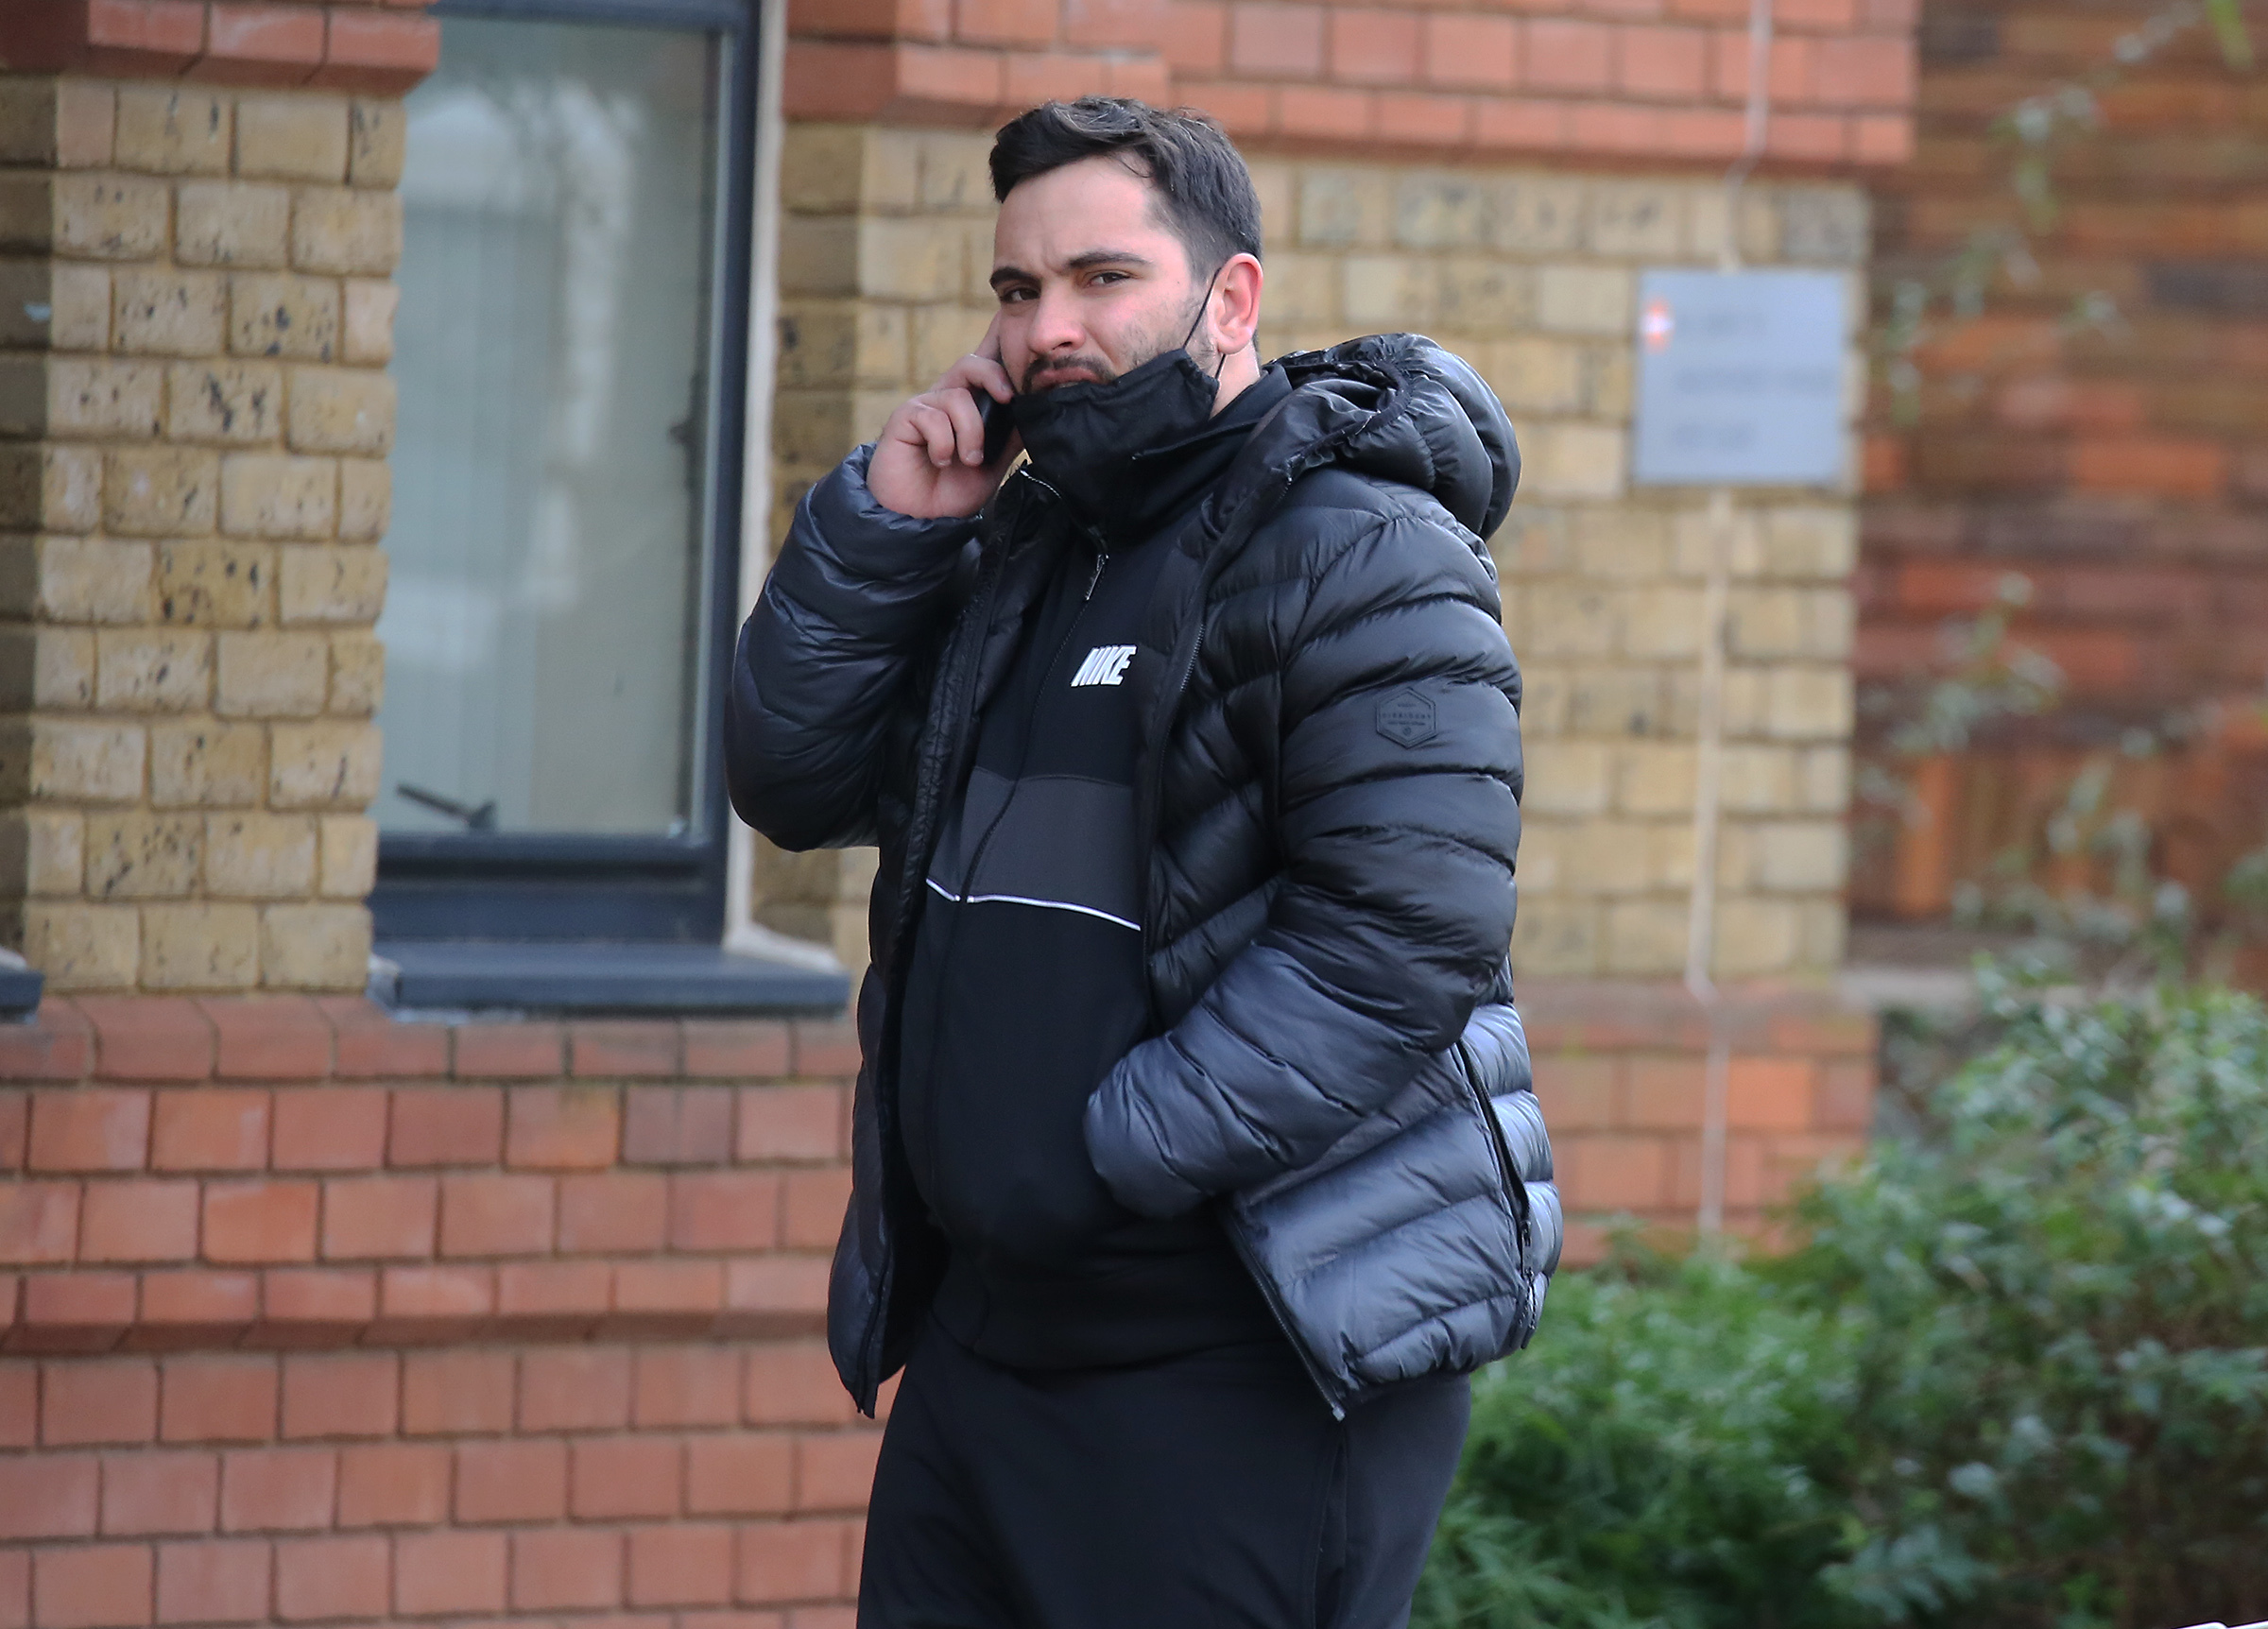 Davey Everson pictured outside St Albans Crown Court on the first day of the trial. Credit: South Beds News Agency